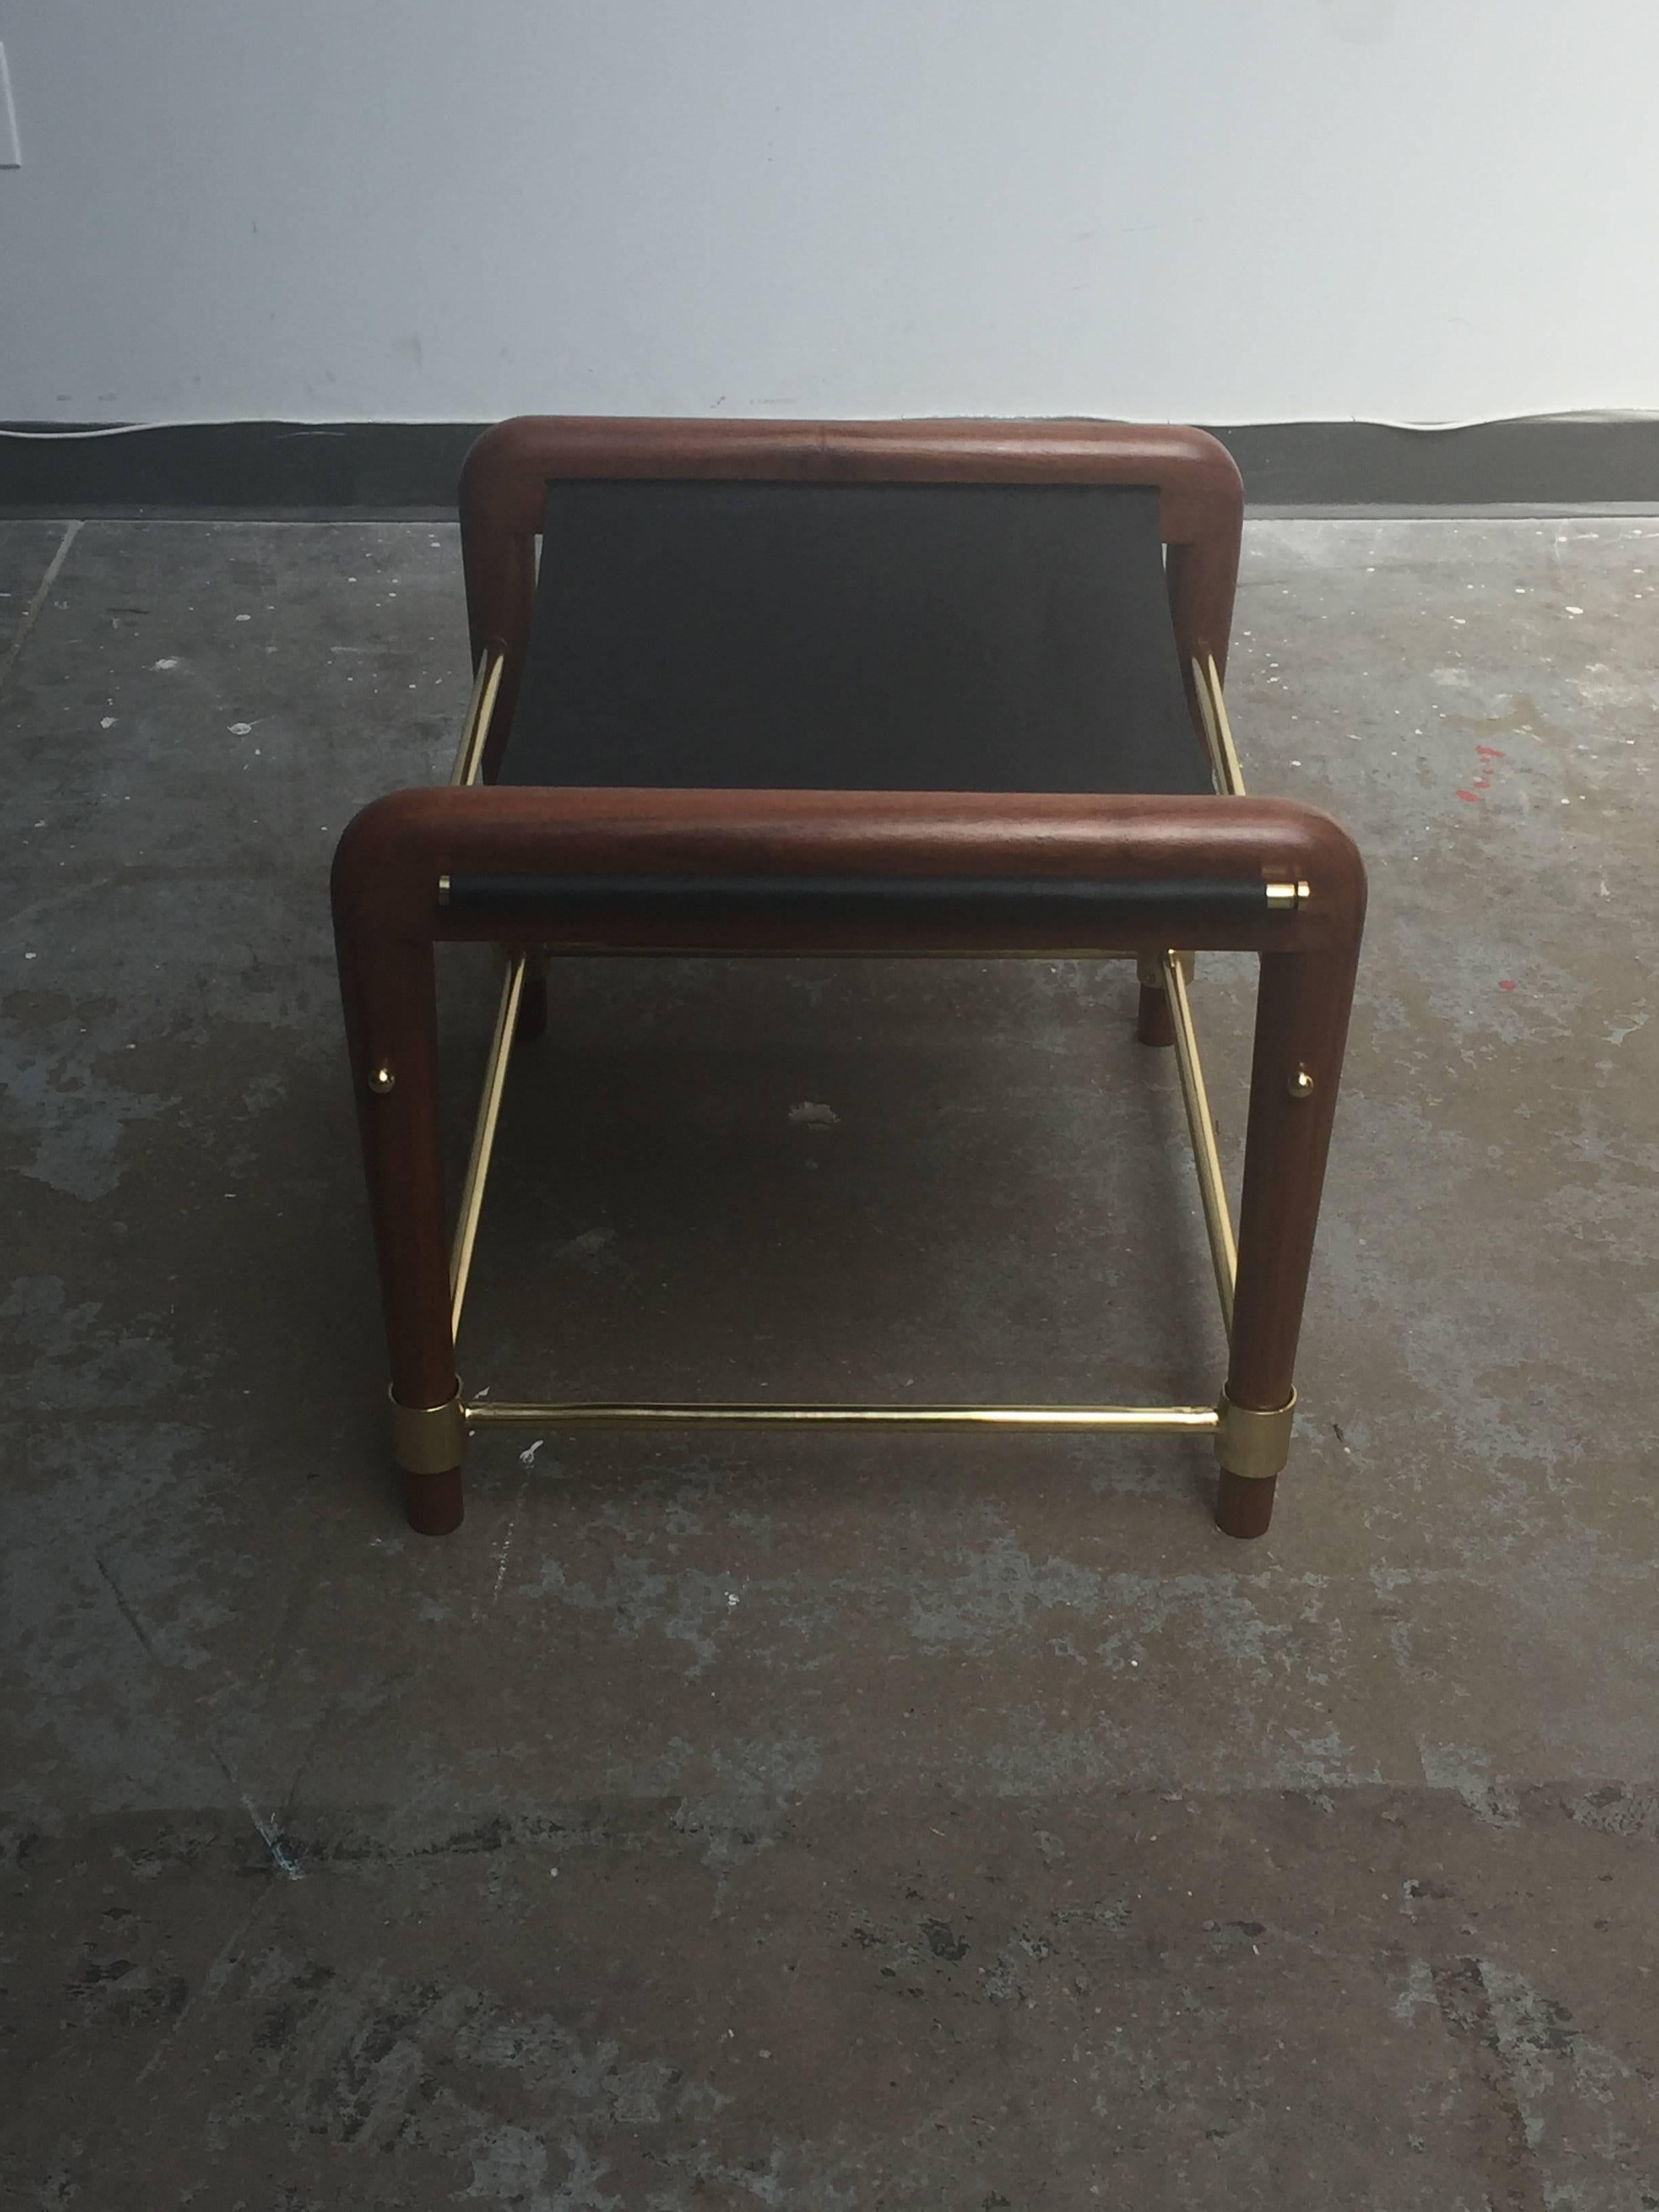 Solid natural Tzalam wood, brass frame and black leather seat.